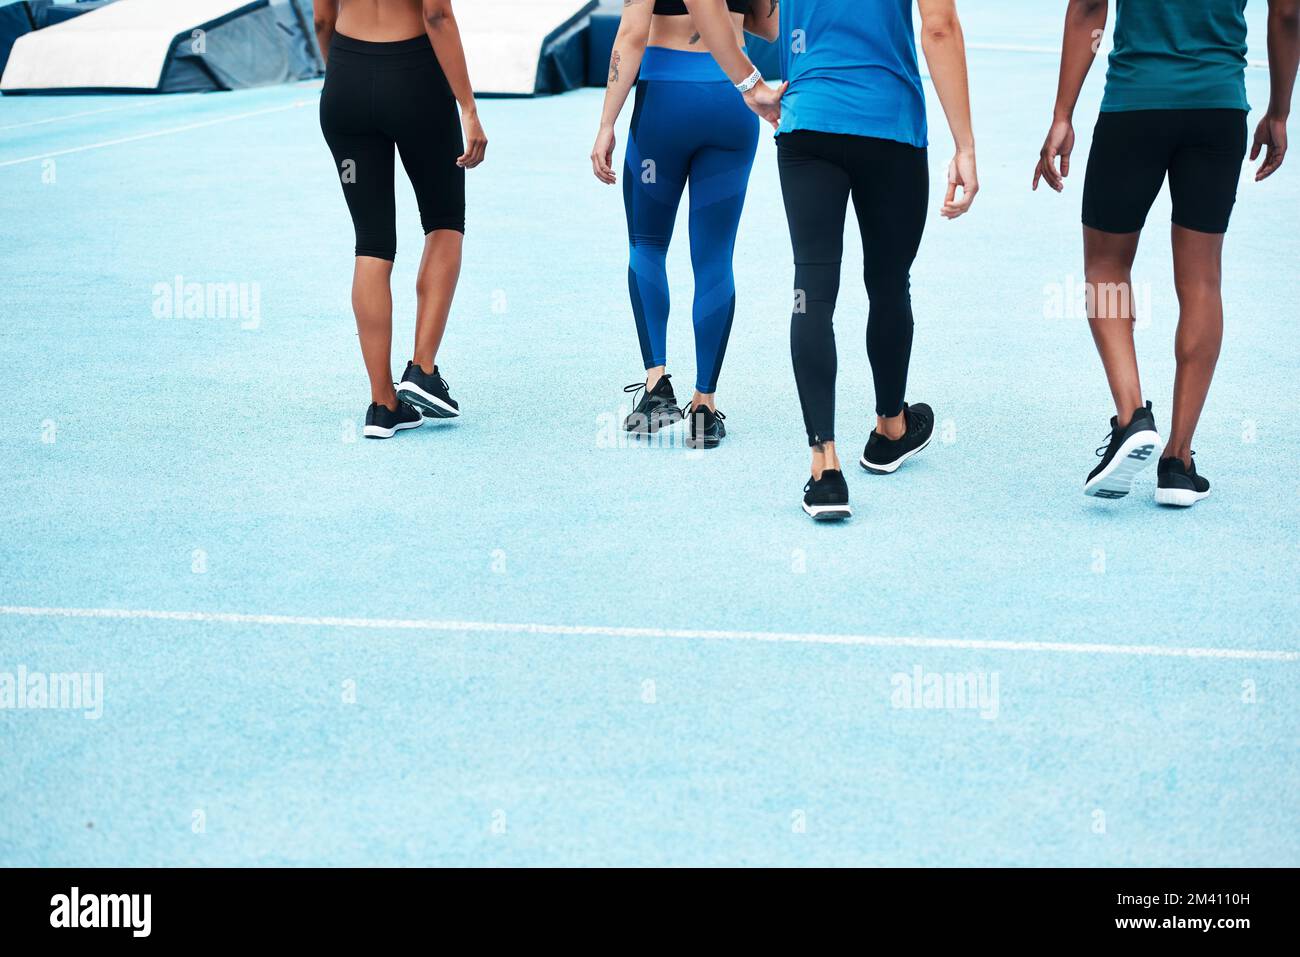 Fitness is our favourite habit. an unrecognizable group of athletes walking together after a running race on a track field. Stock Photo